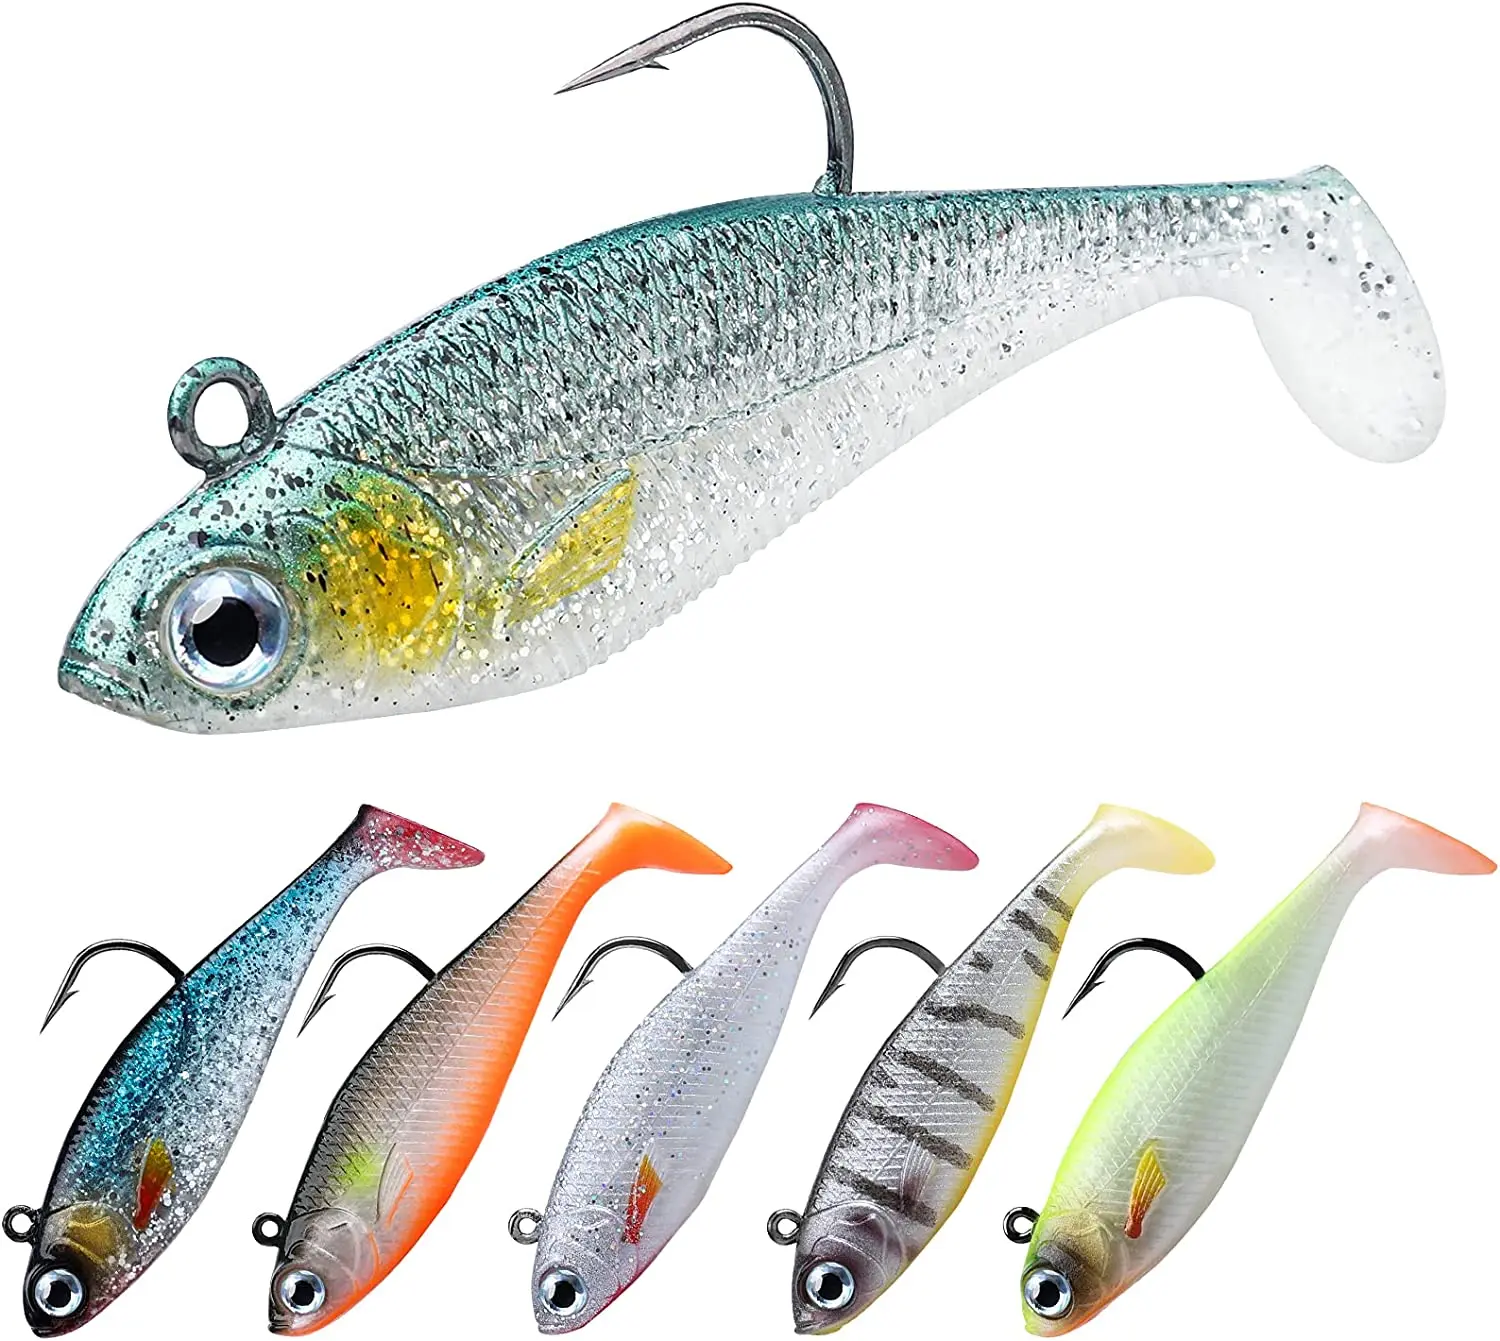 TRUSCEND Crayfish Pre-Rigged Jig Head Soft Fishing Lures Paddle